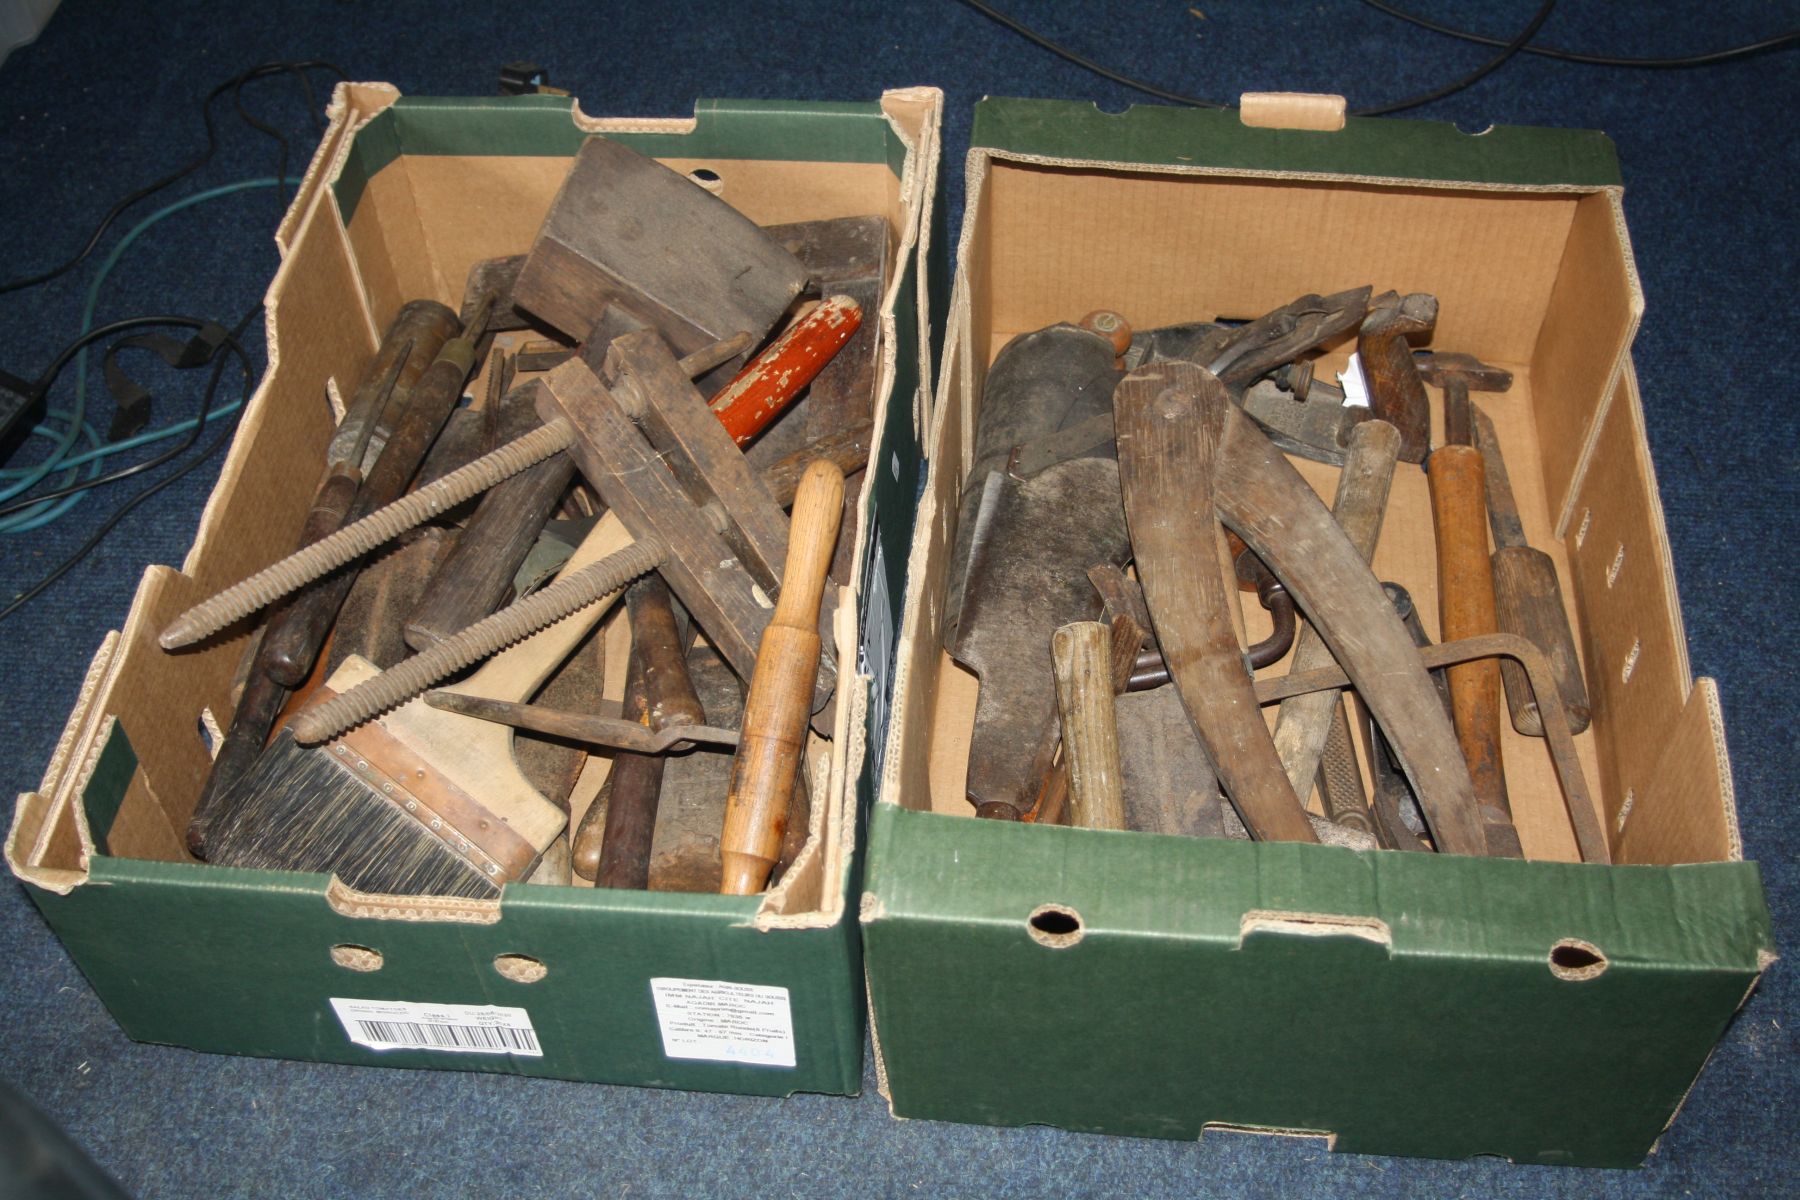 FIVE BOXES OF VARIOUS HAND TOOLS, to include planes, saws, hand sythes, files, chizels, hammers, - Image 4 of 14